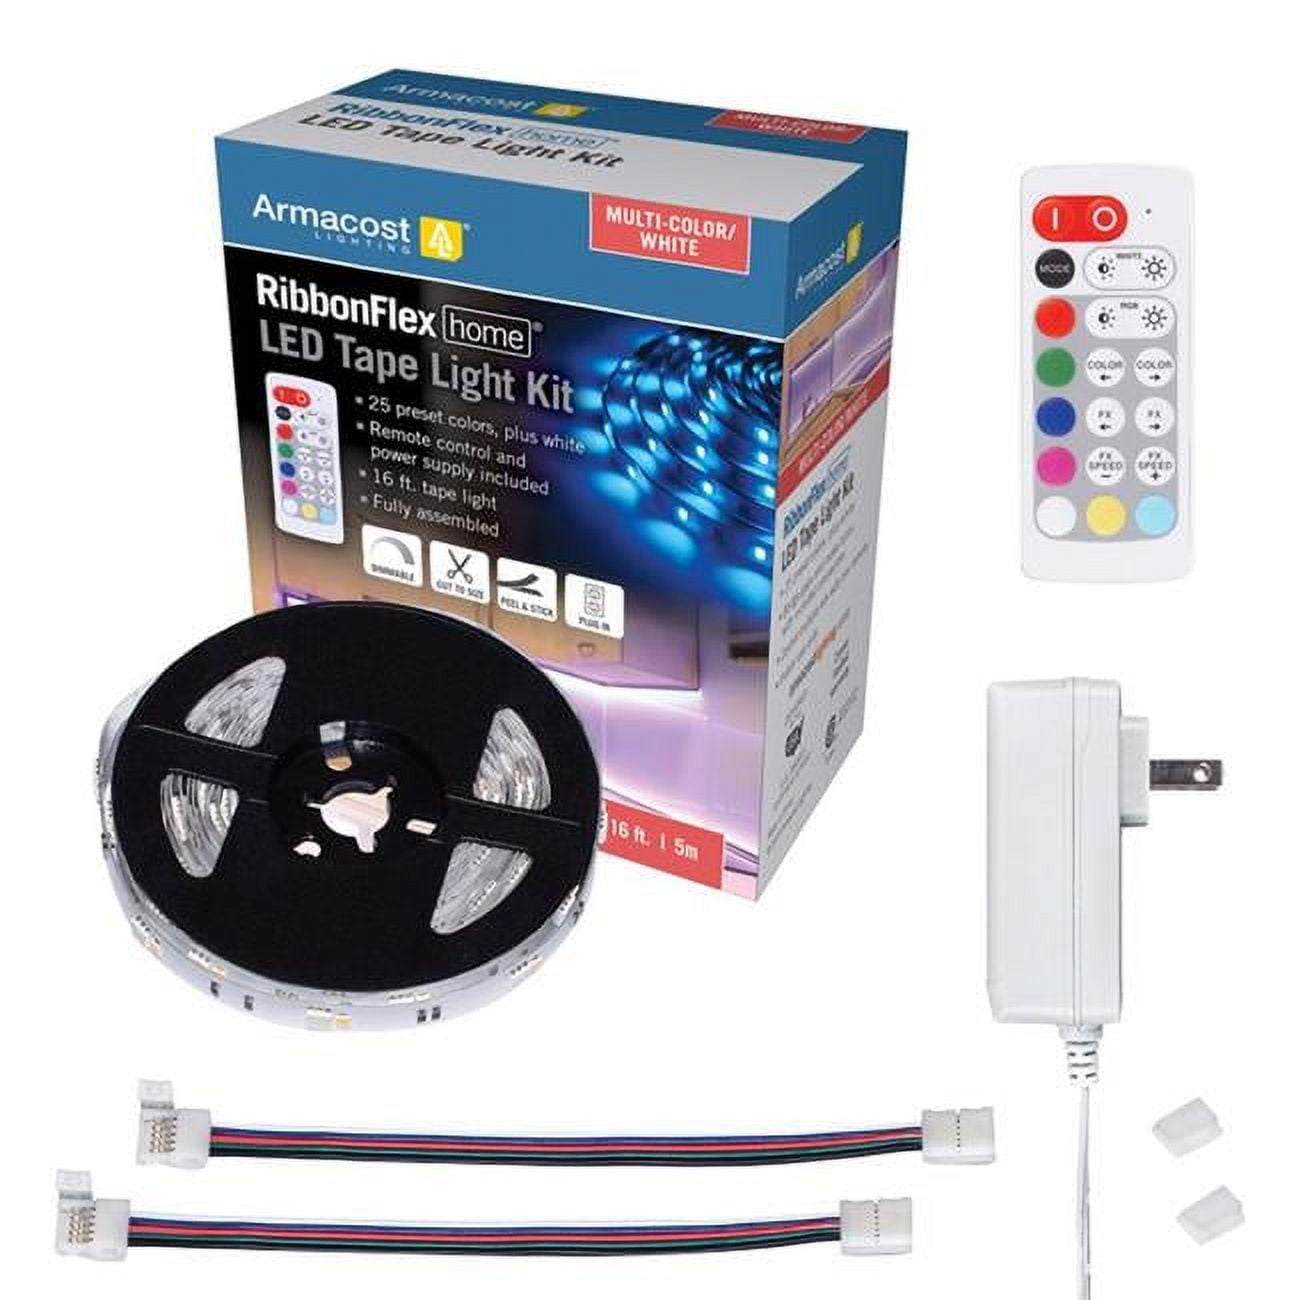 Picture of Armacost Lighting 3006935 16 ft. Ribbonflex Home Plug-In LED Strip Tape Light Kit - Multicolored